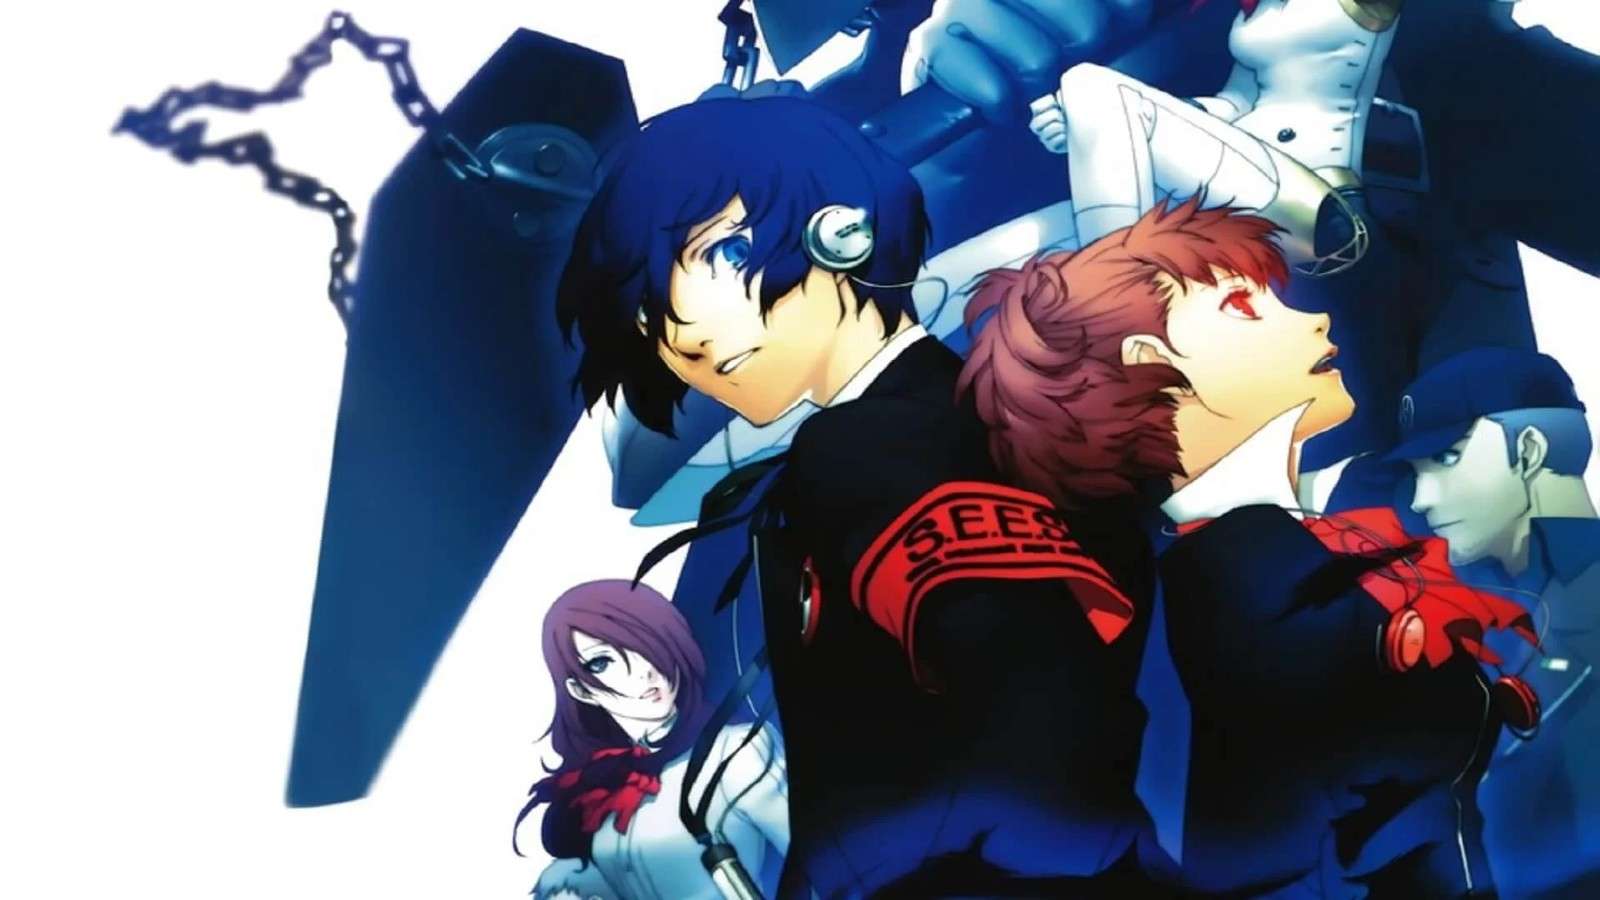 An image of official Persona 3 Portable artwork.